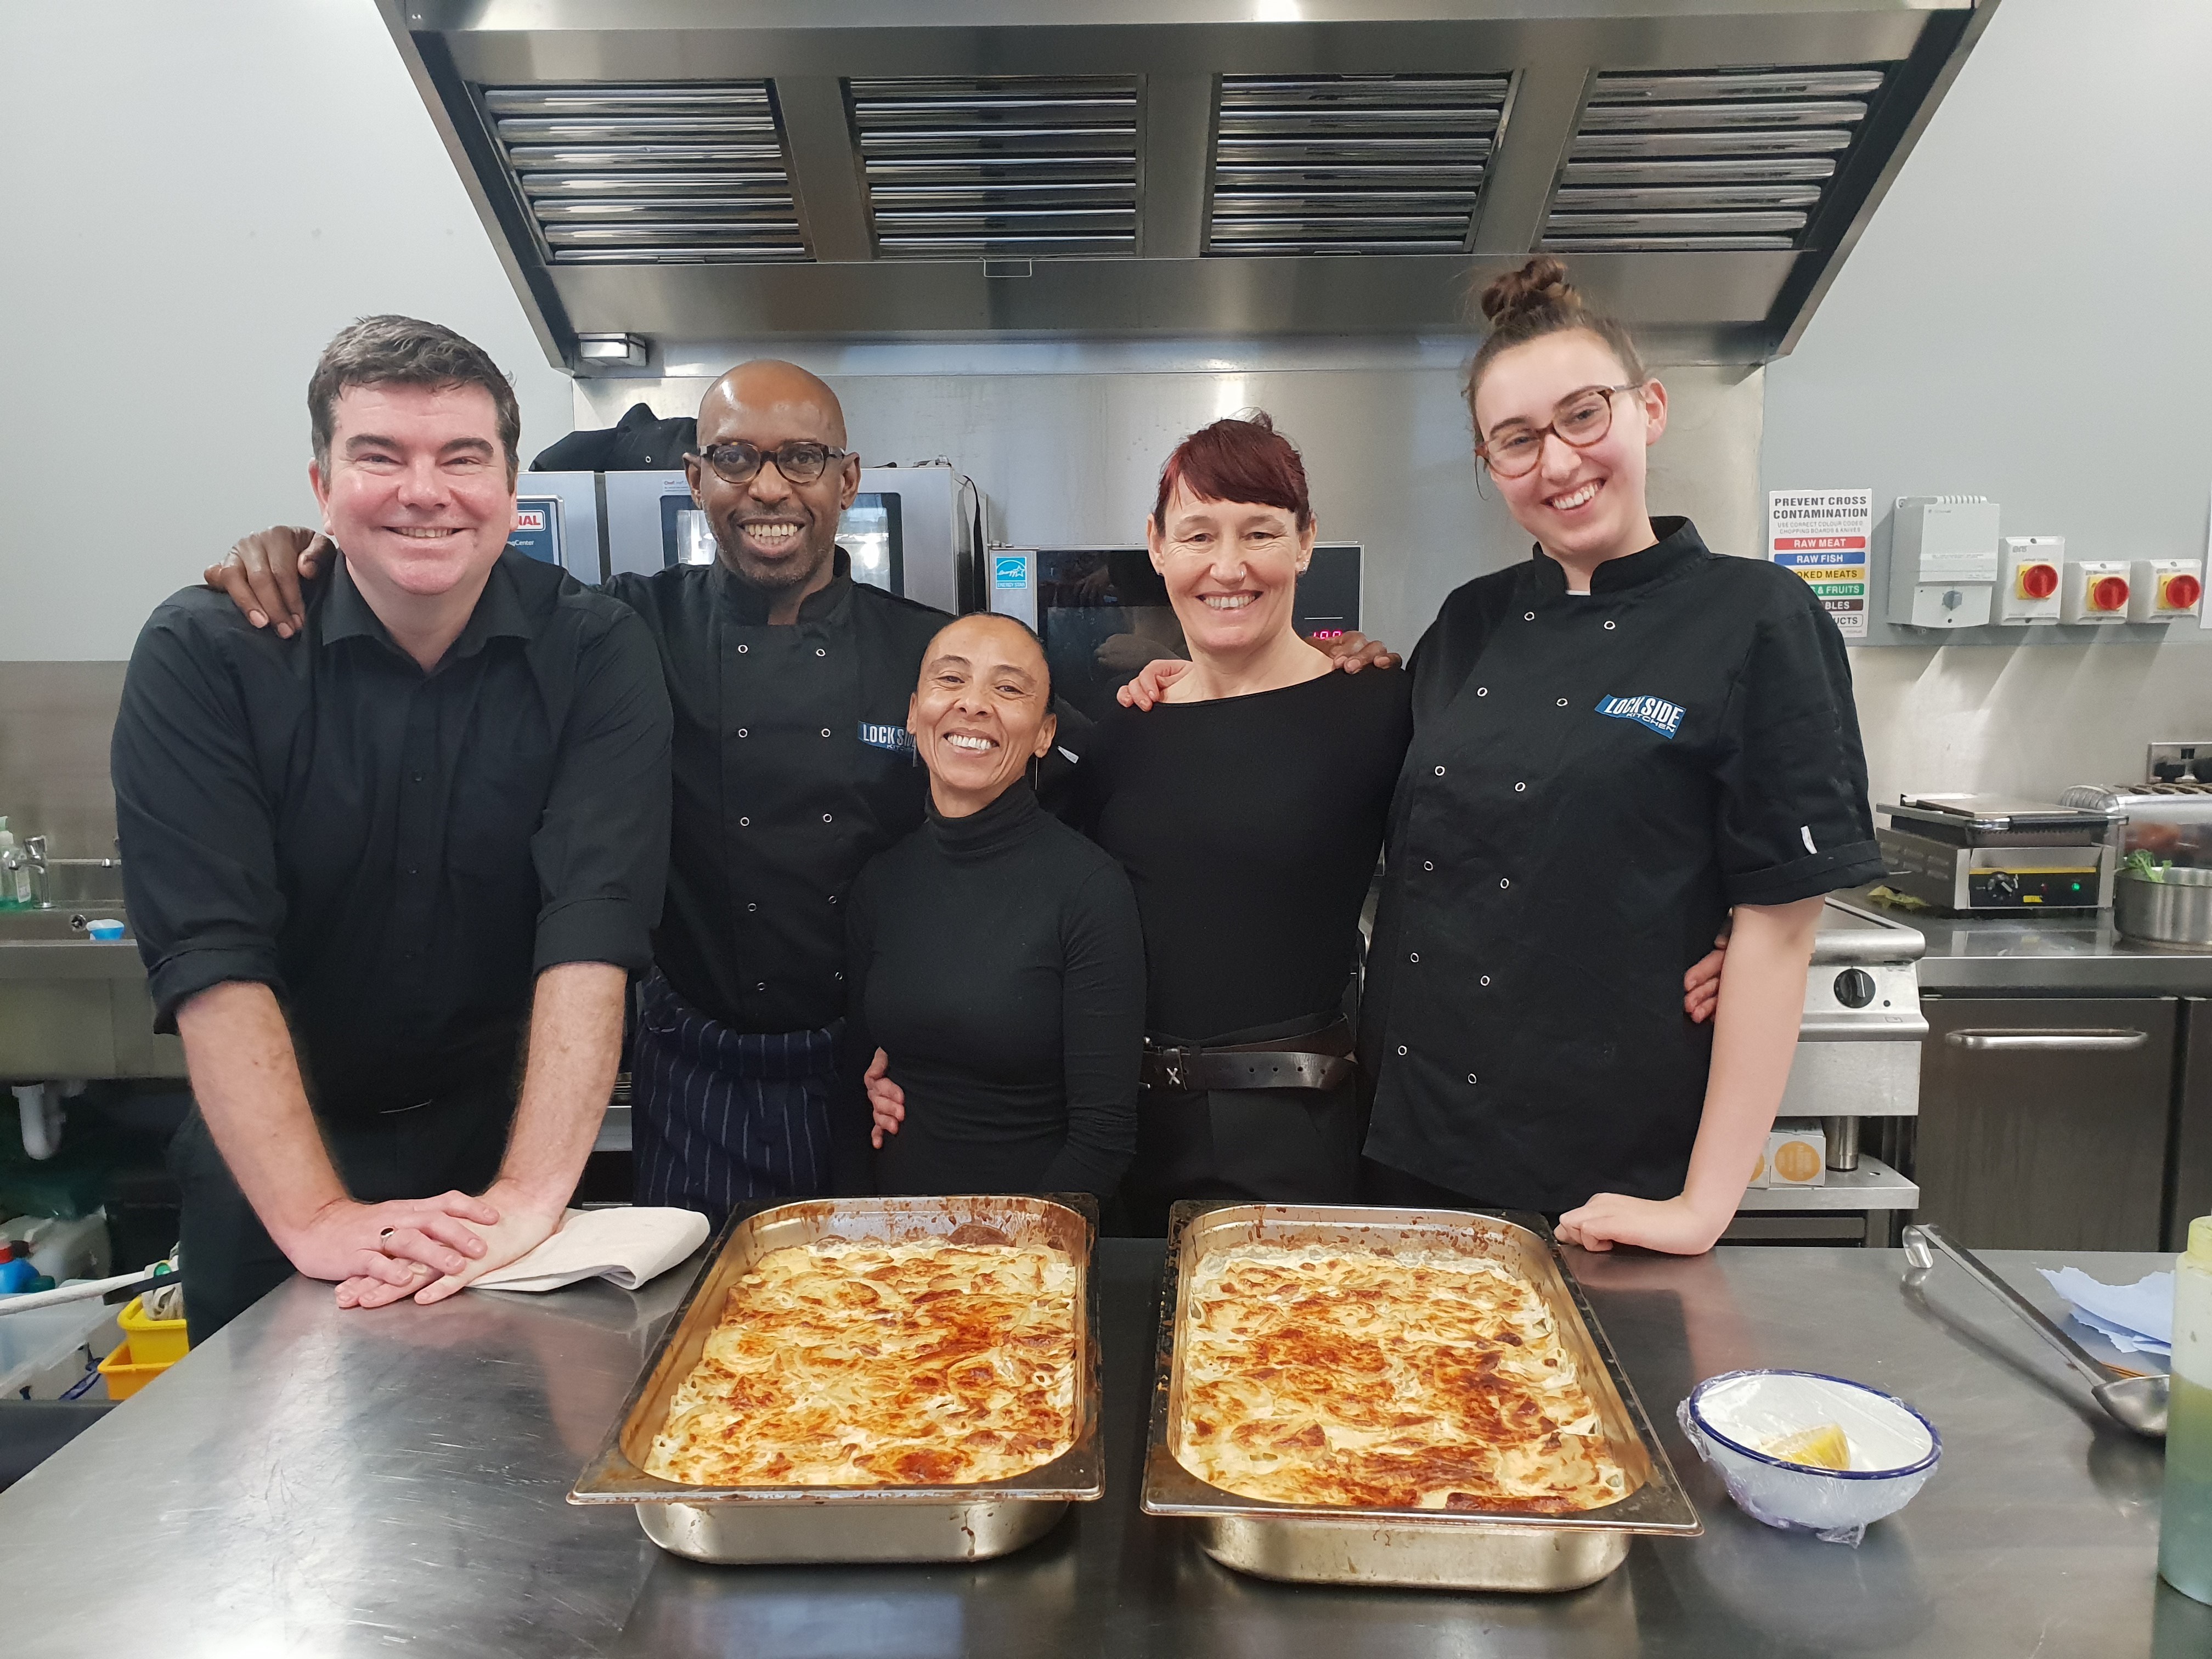 A photo of the Lockside Kitchen team